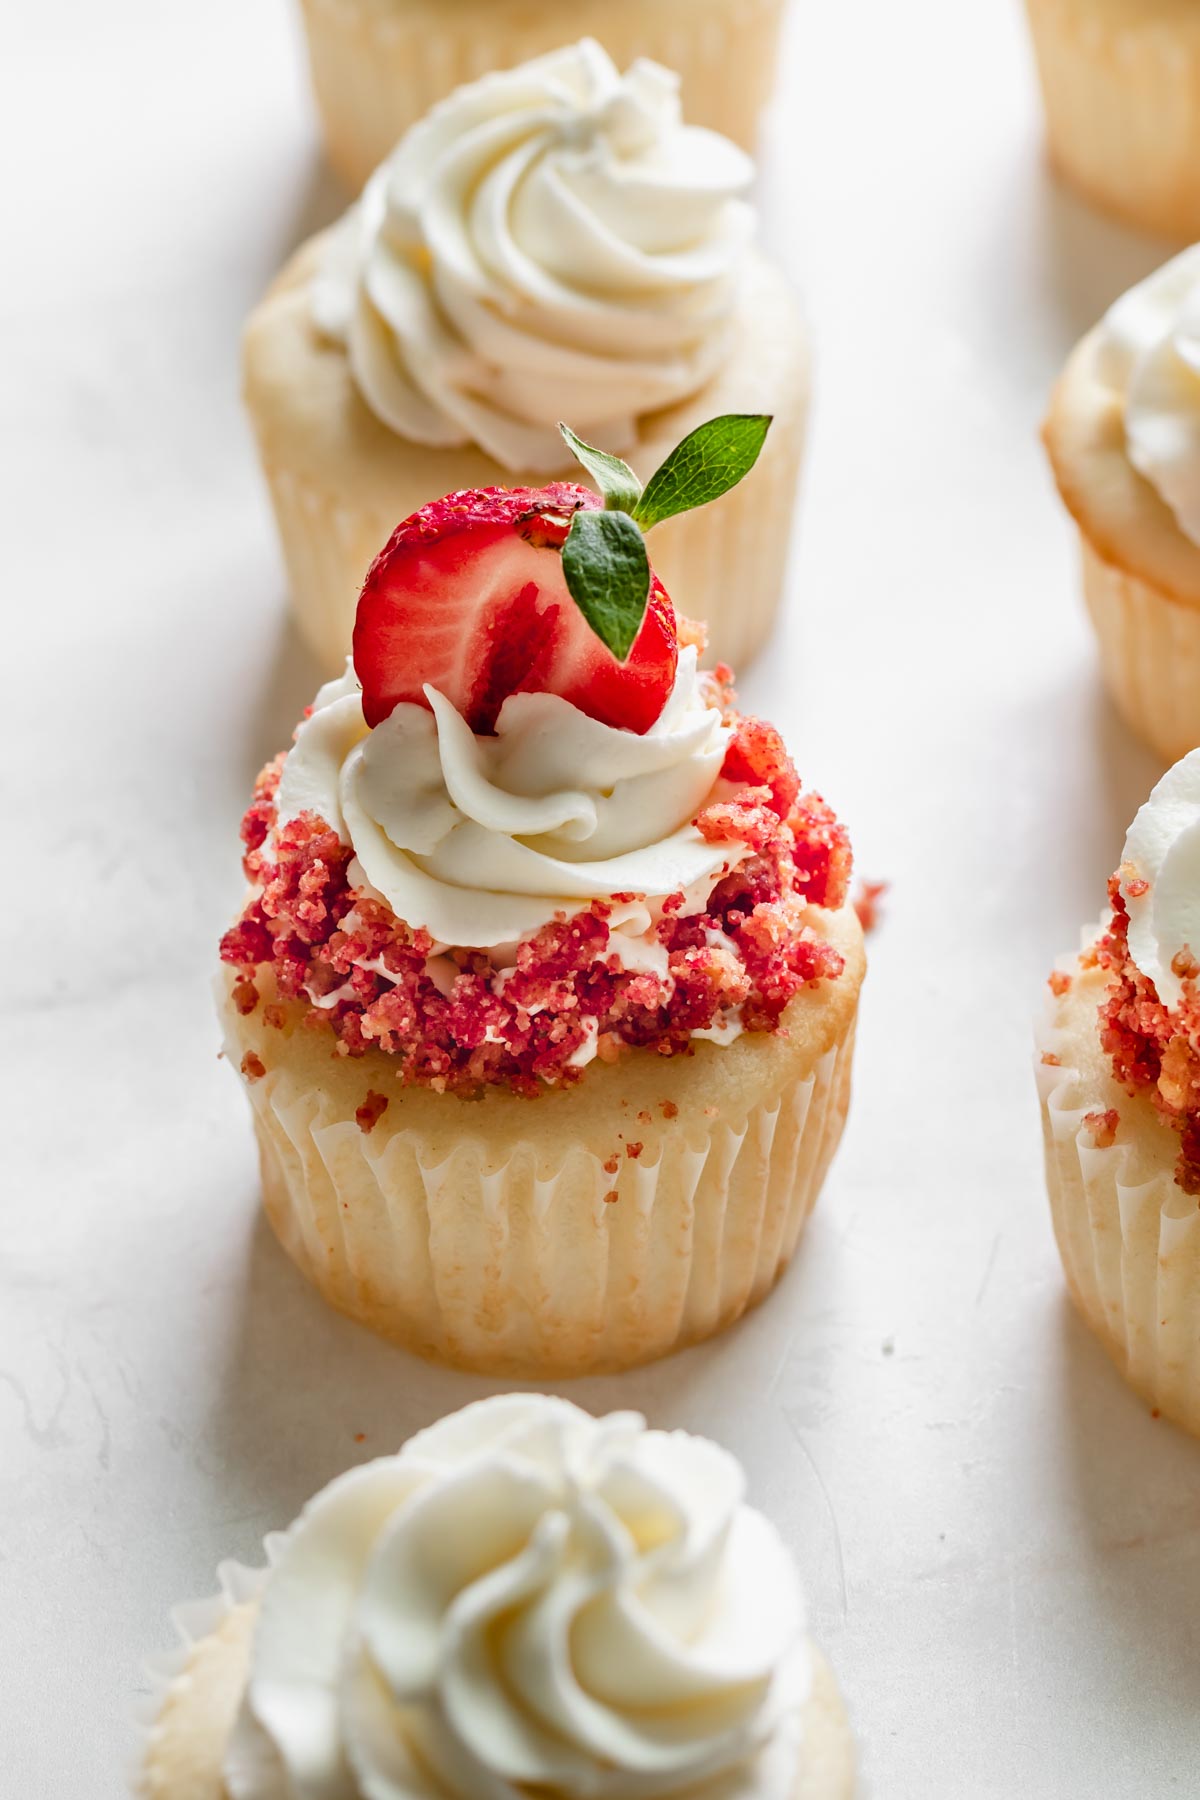 One finished strawberry crunch cupcakes surrounded by other frosted cupcakes.